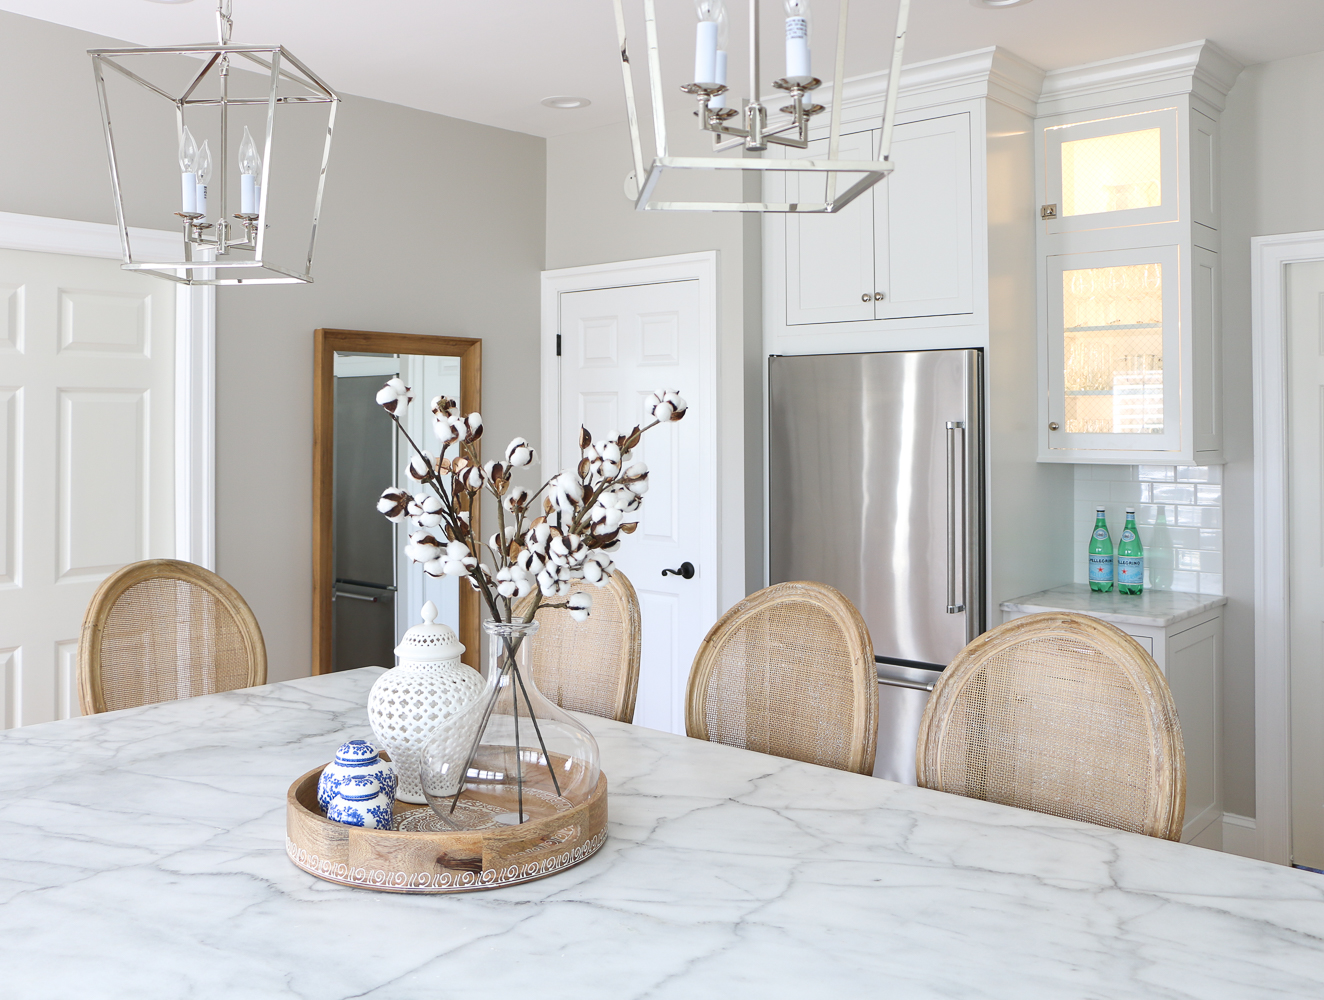 Sherwin Williams Agreeable Gray walls in kitchen with white cabinets, carrara marble kitchen island, cane back counter stools. Round tray centerpiece with ginger jars and glass vase